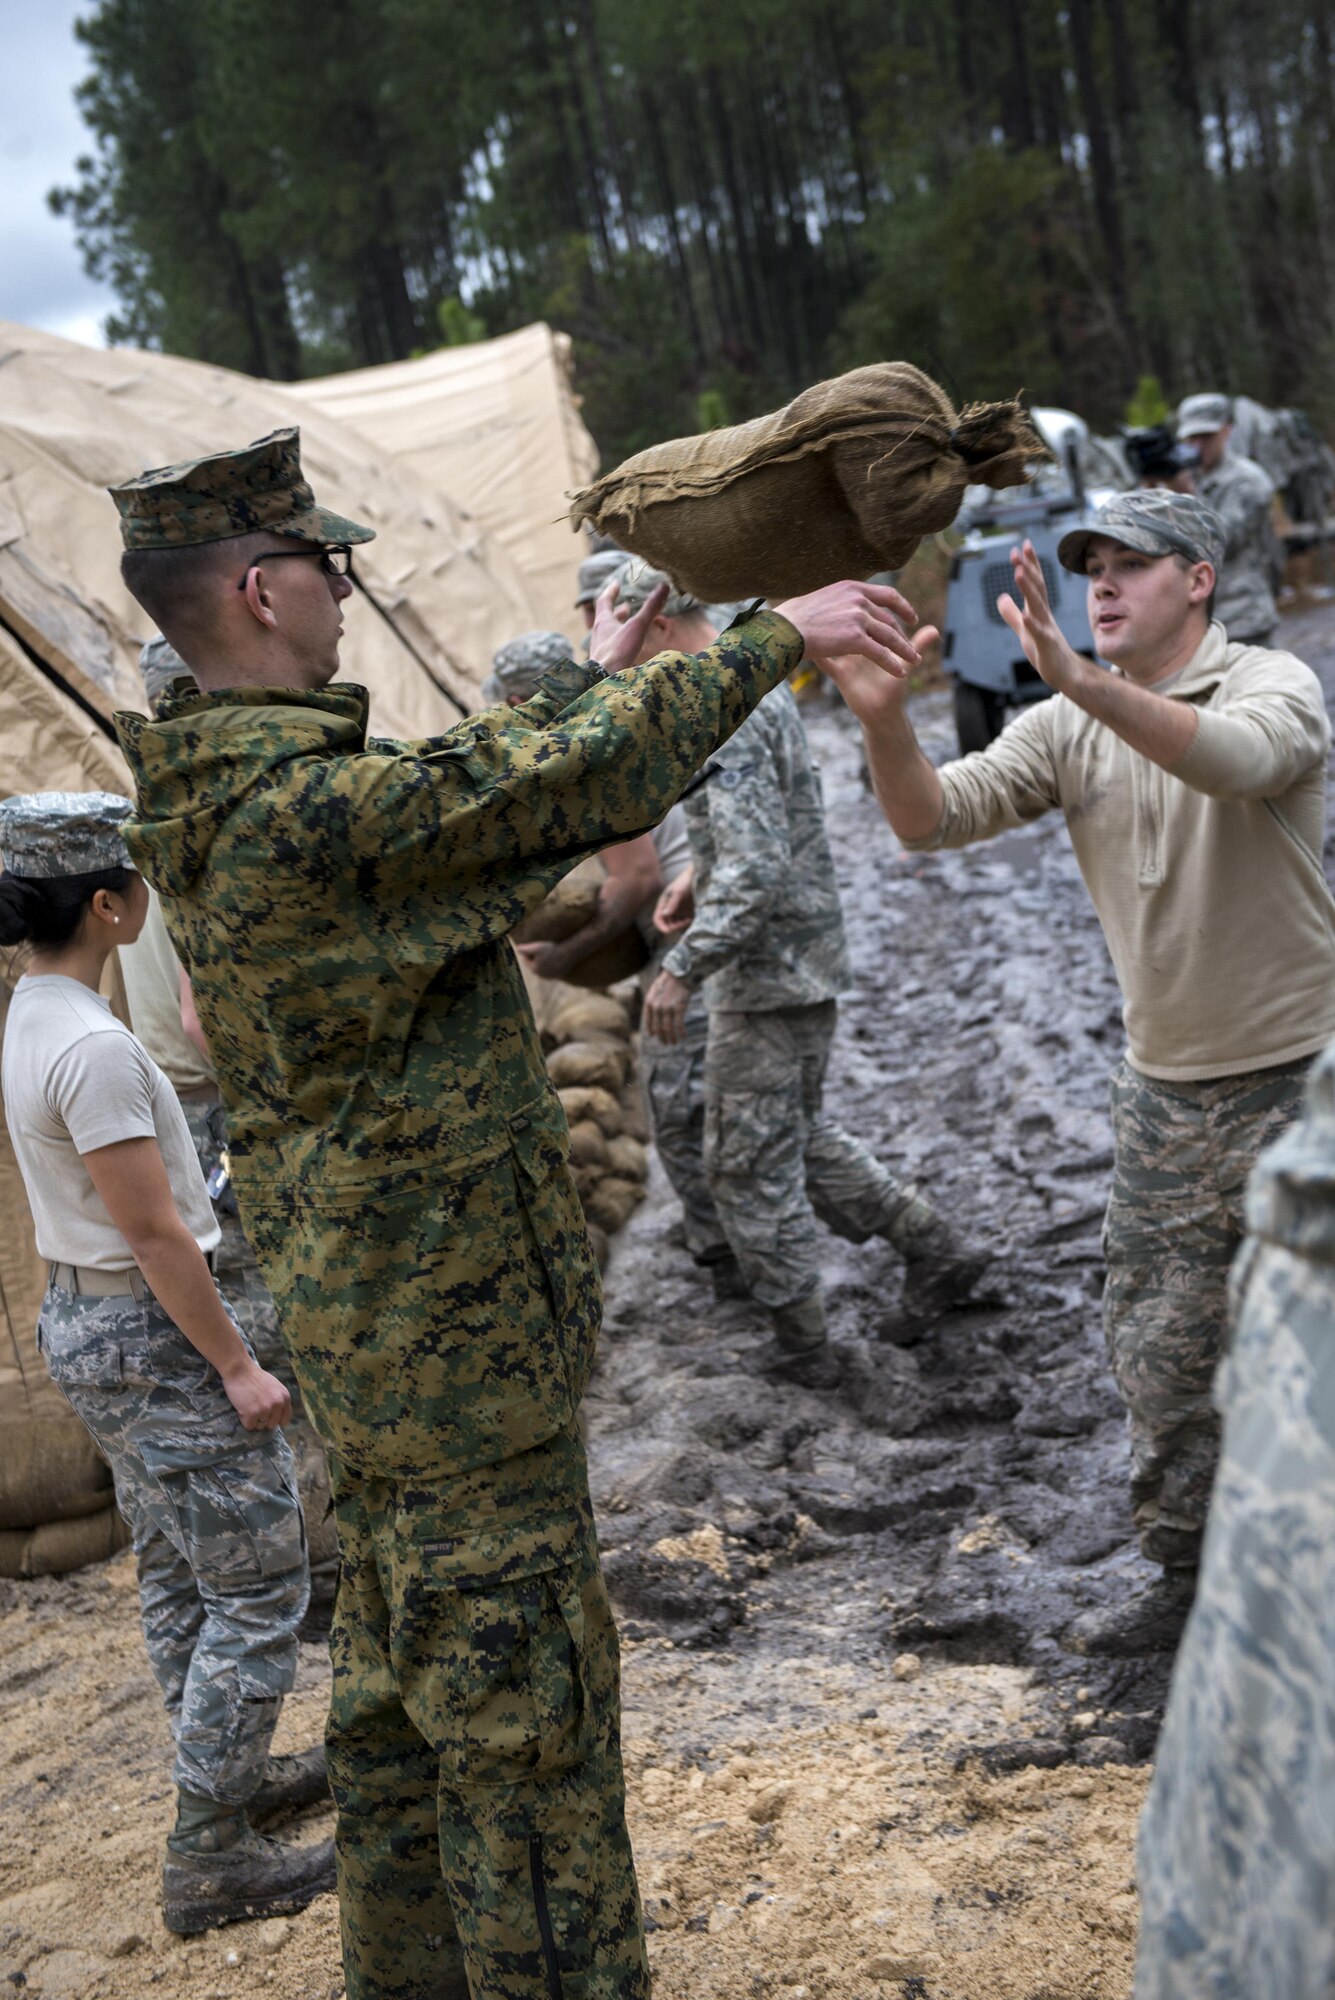 A Marine passes a sandbag to an Airman while building a structure Feb. 24, 2015, near Statenville, Ga. The structure will serve as a command post for a search and recovery to team to find aircraft parts following an accident involving an F/A18-D Hornet assigned to Marine Corps Air Station Beaufort, S.C. The Marines are assigned to MCAS Beaufort, and the Airmen are assigned to the 23rd Civil Engineer Squadron. (U.S. Air Force photo/Senior Airman Sandra Marrero)